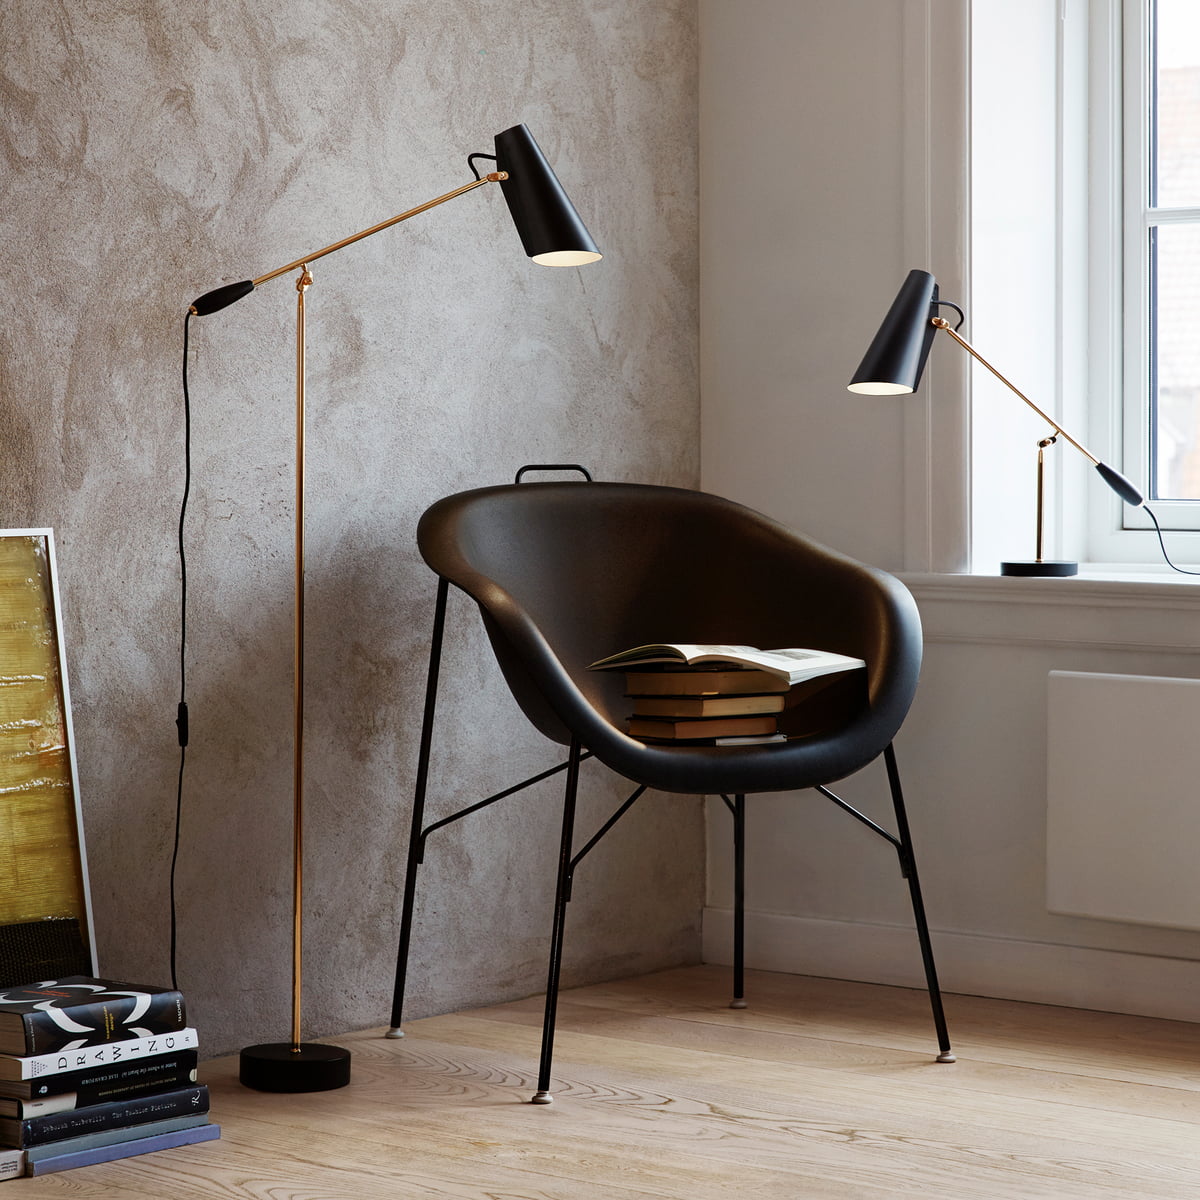 Northern - Birdy Table lamp | Connox